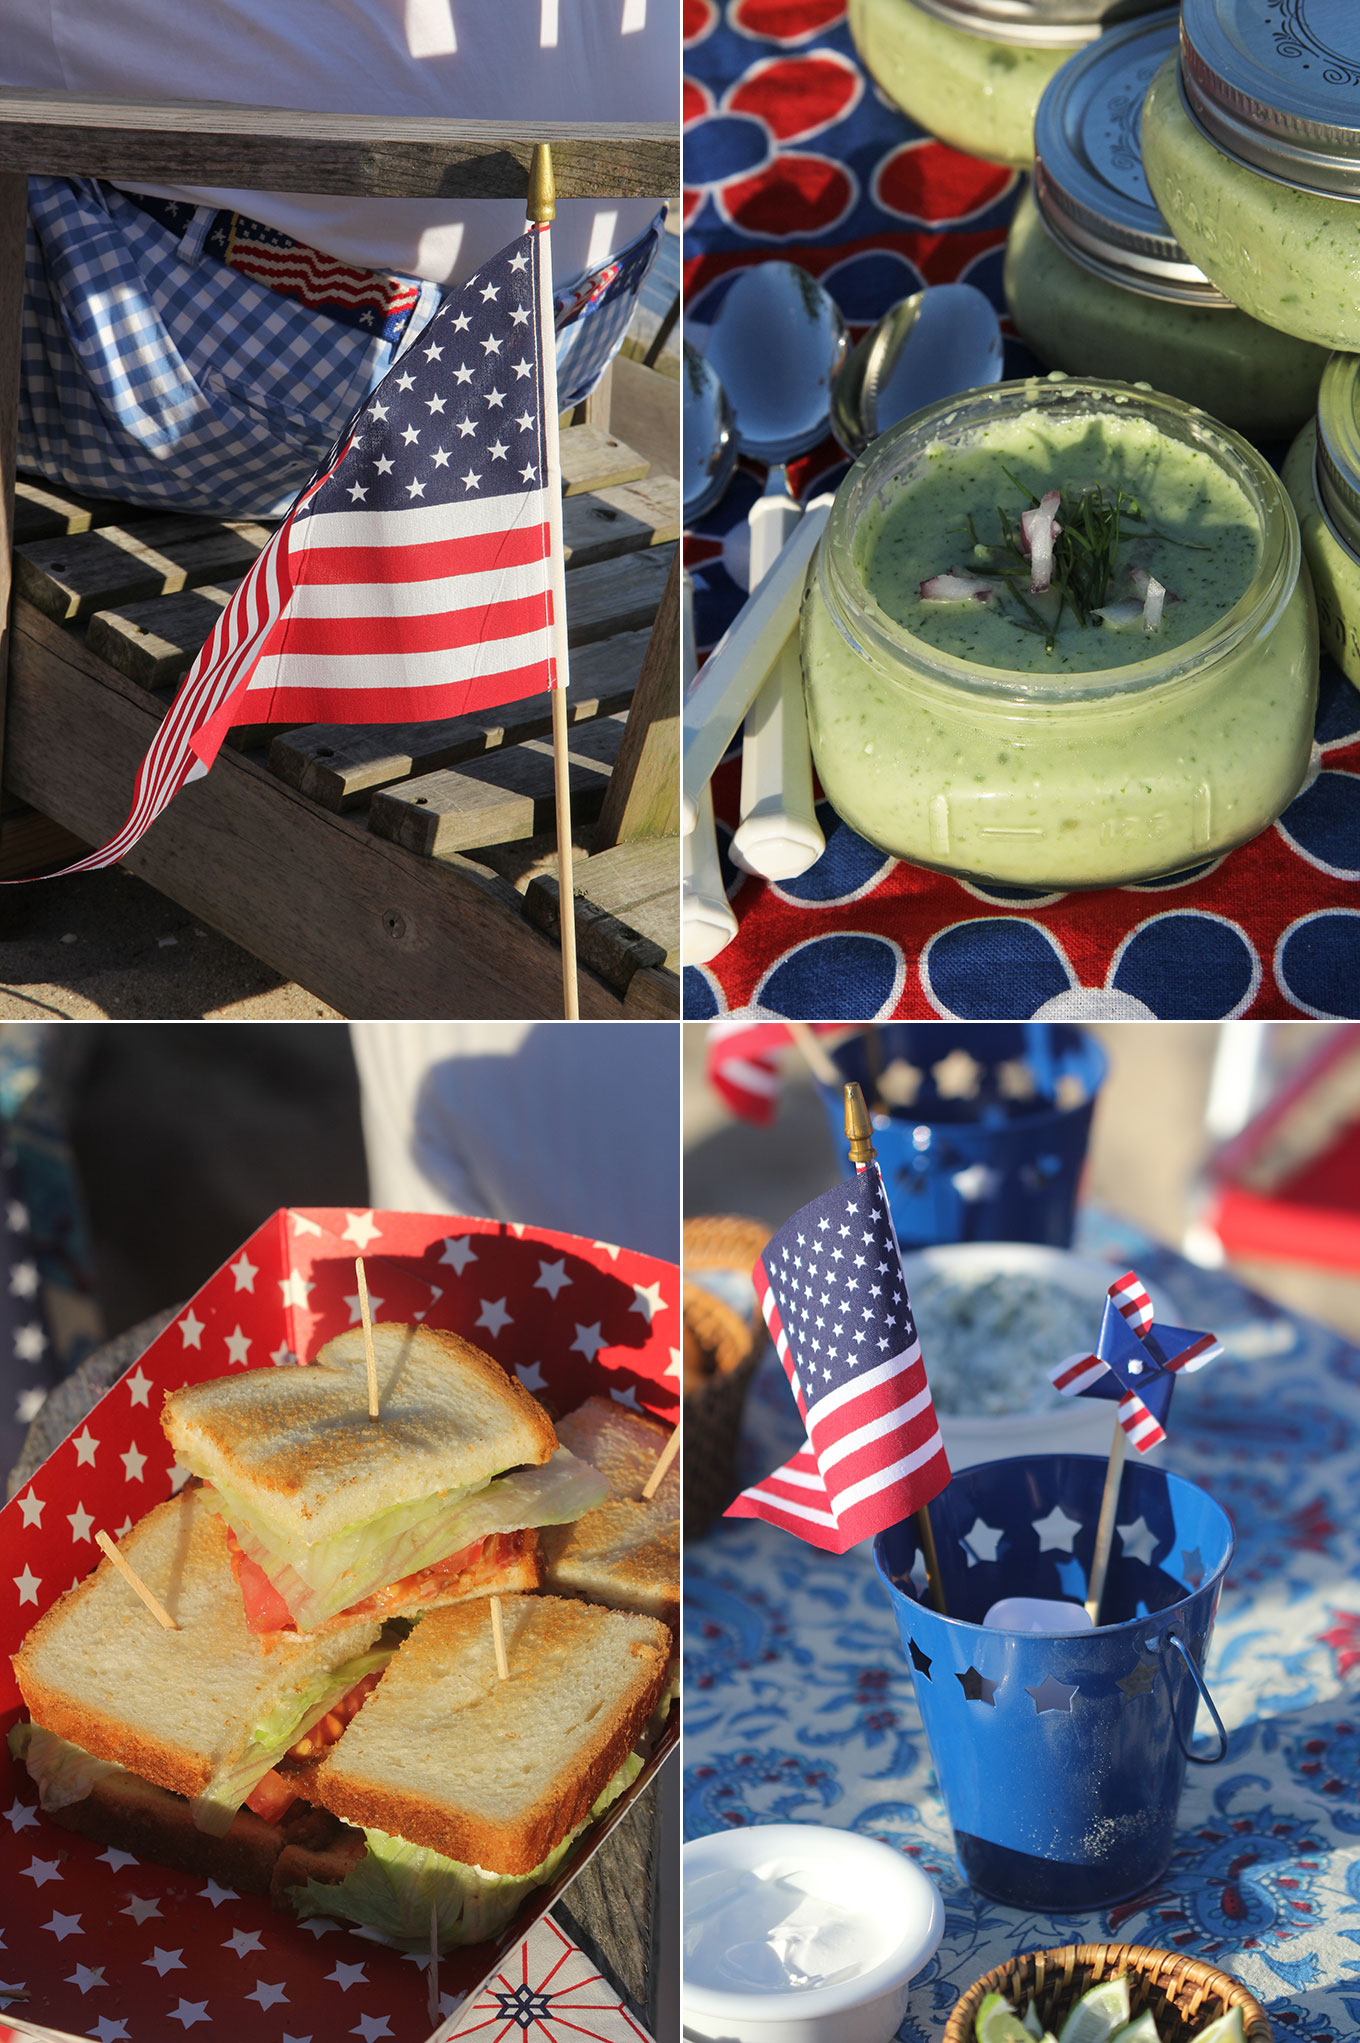 Plan a patriotic Beach Picnic with this delicious menu with easy to make recipes and a FREE downloadable packing list.